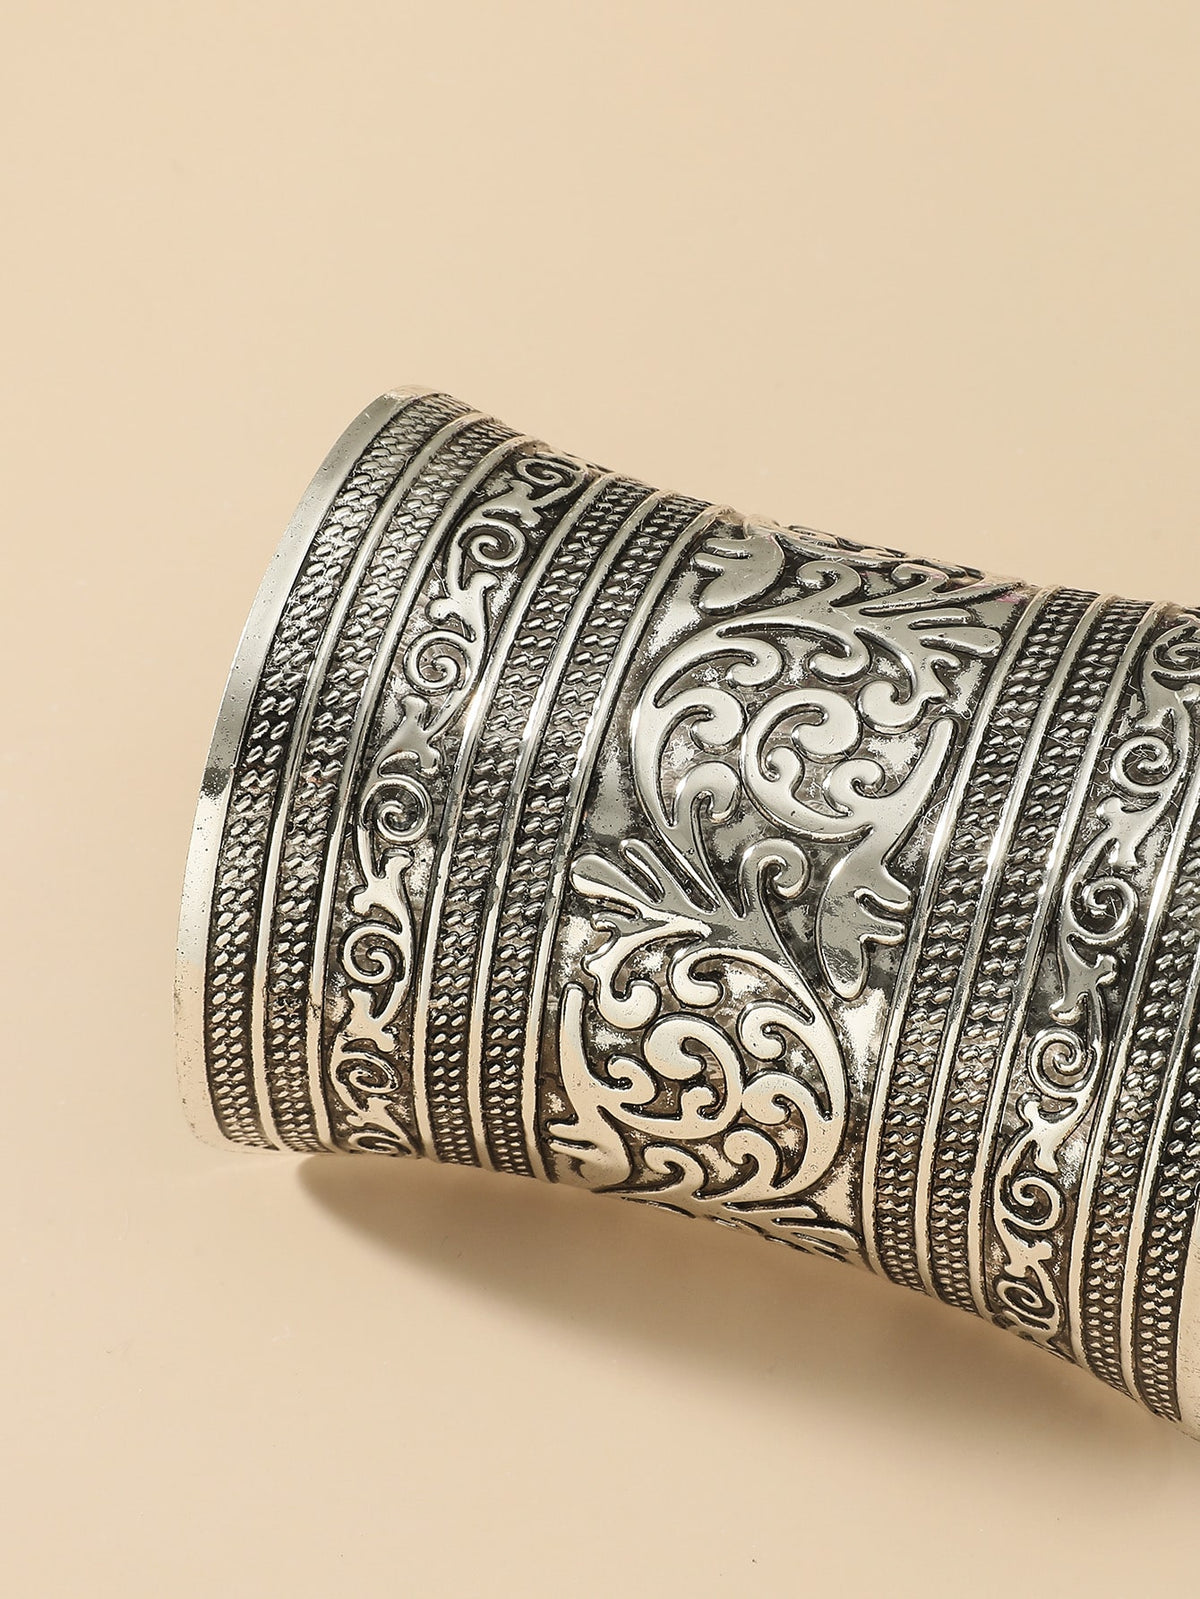 Cuff Style Bracelet with Metal Engraved - 